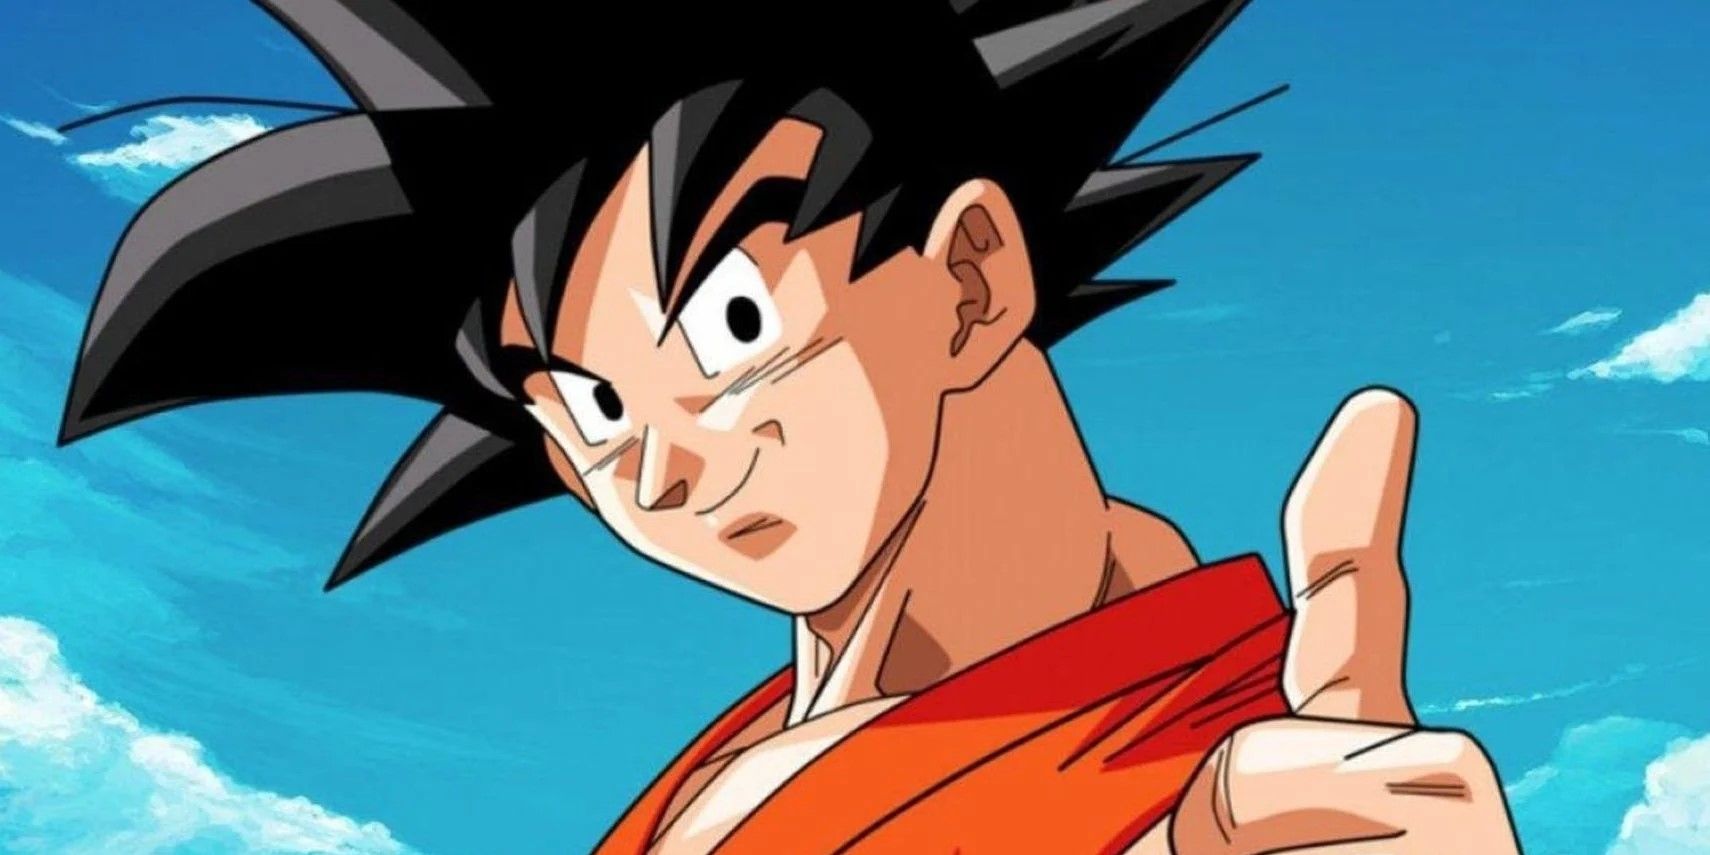 Goku doing a thumbs up and smiling.